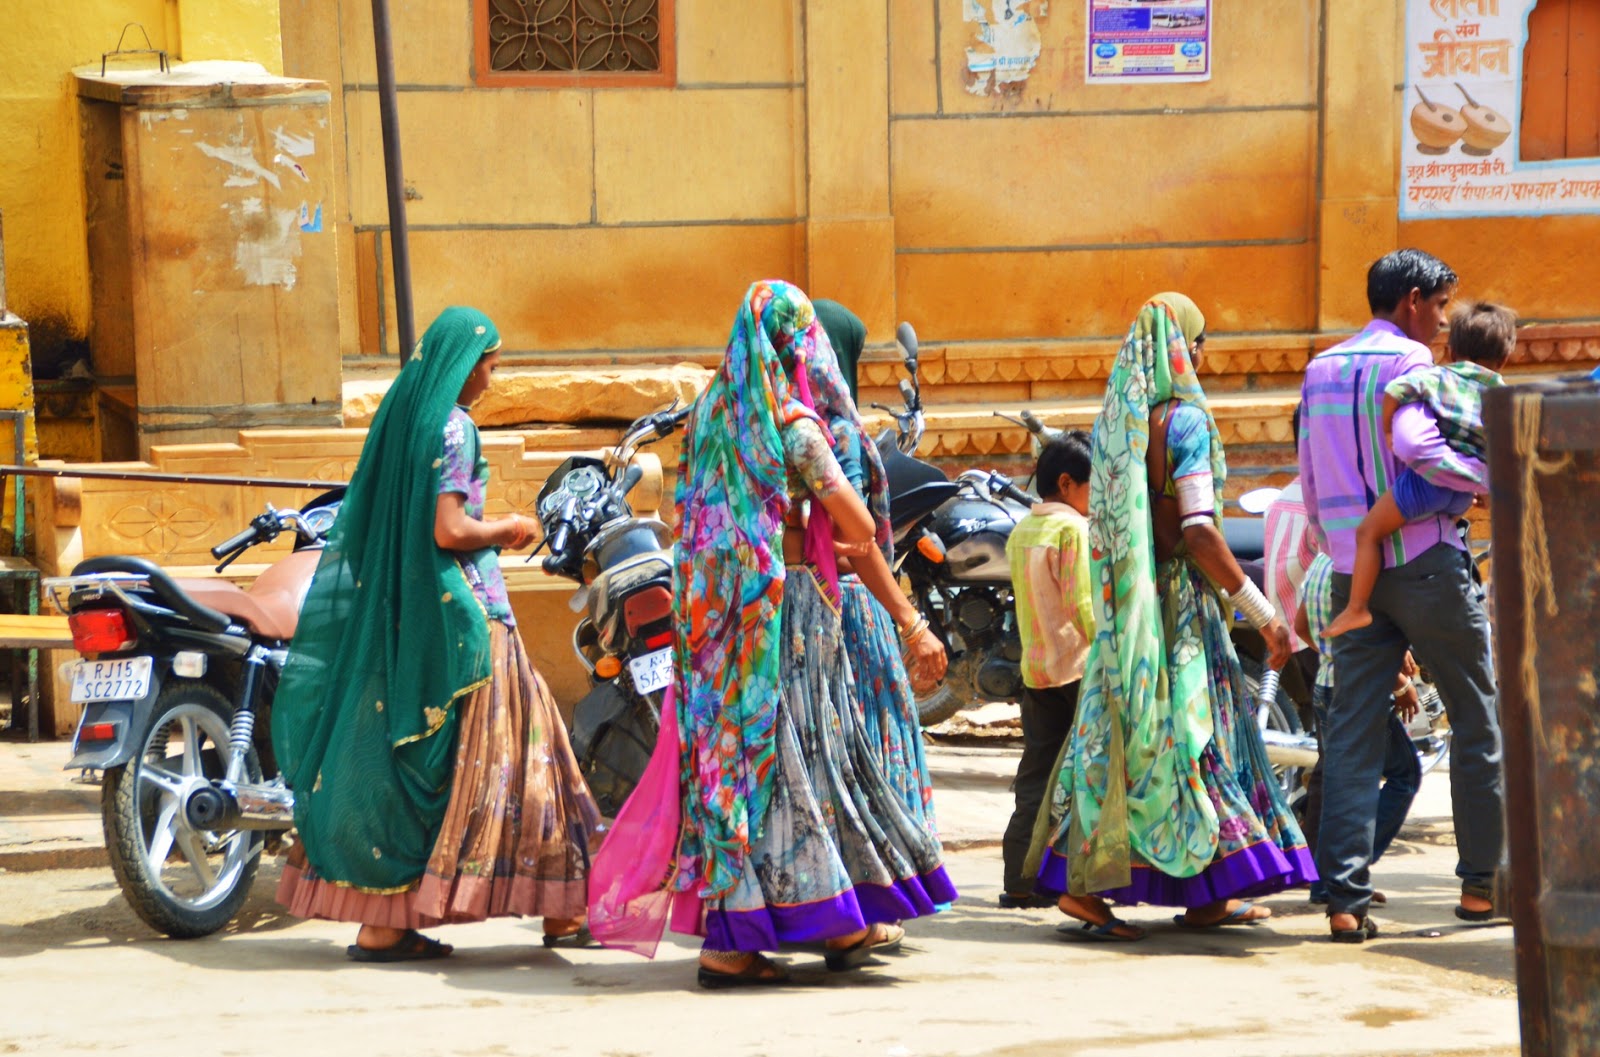 jaisalmer fort street photography rajasthan india women clothes colorful